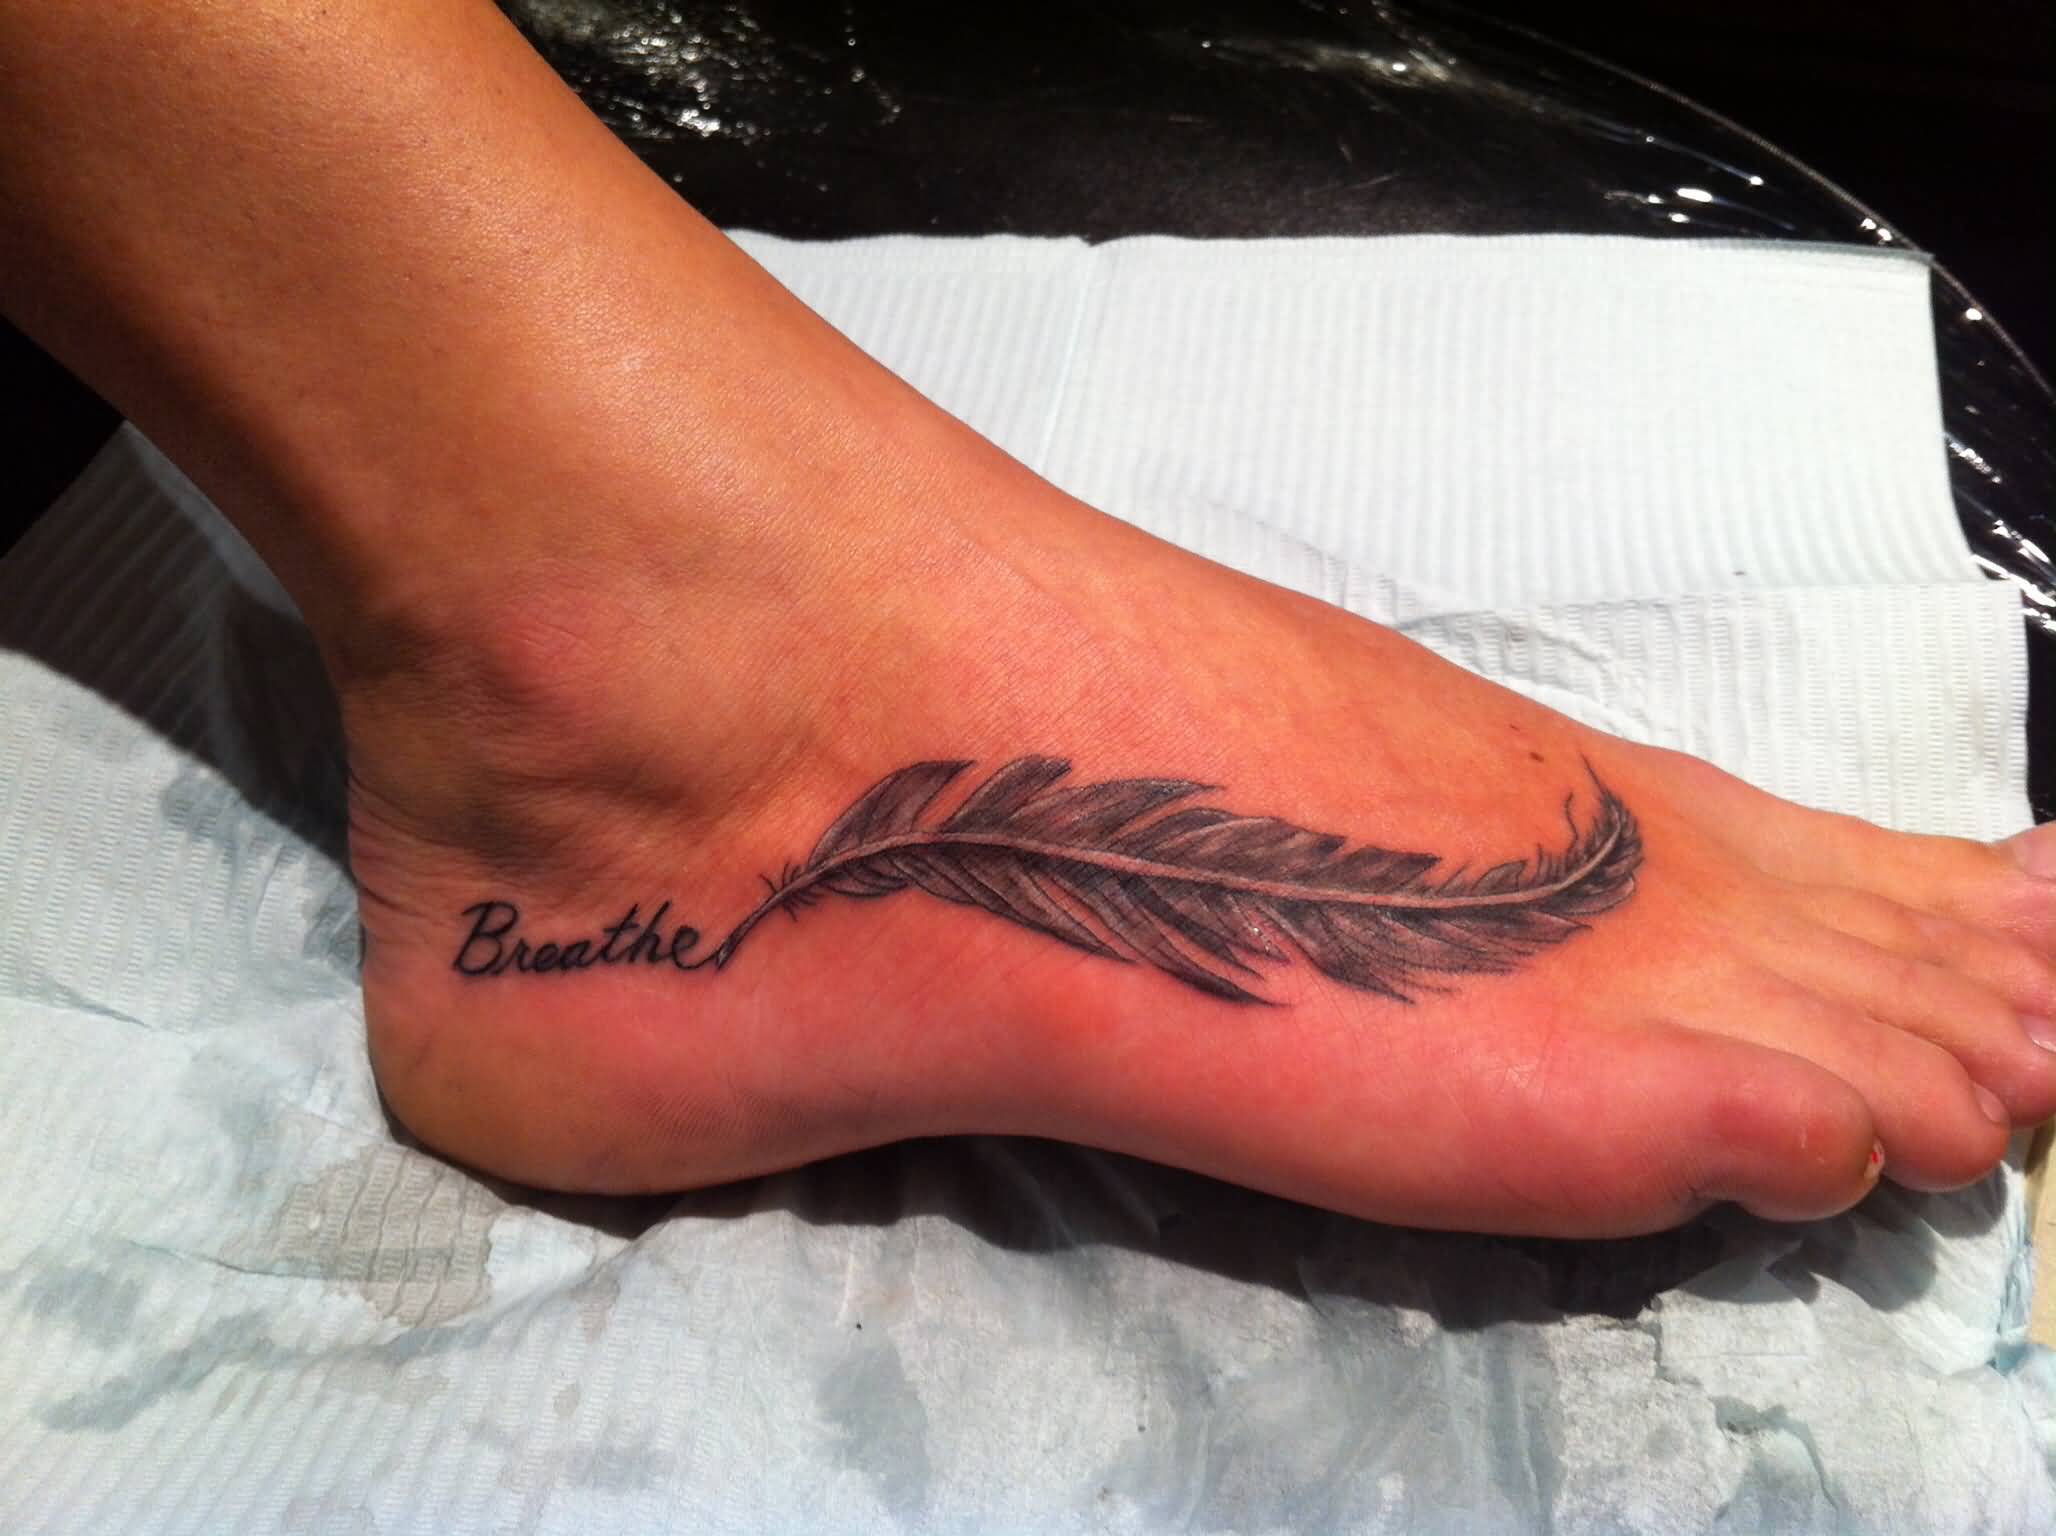 Realistic Feather Breathe Foot Tattoo